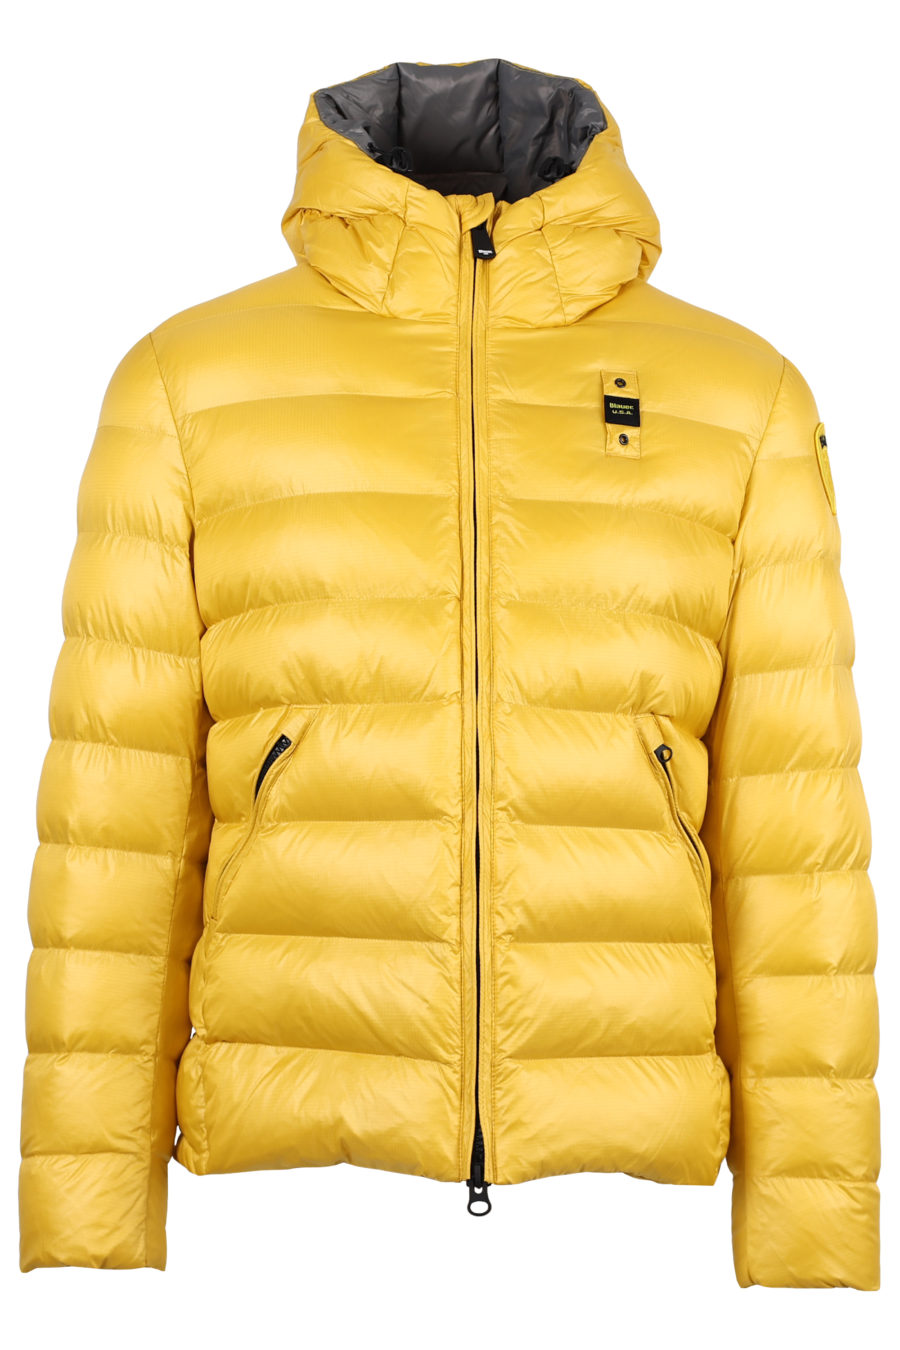 Yellow quilted down jacket with eco-friendly padding - IMG 1314